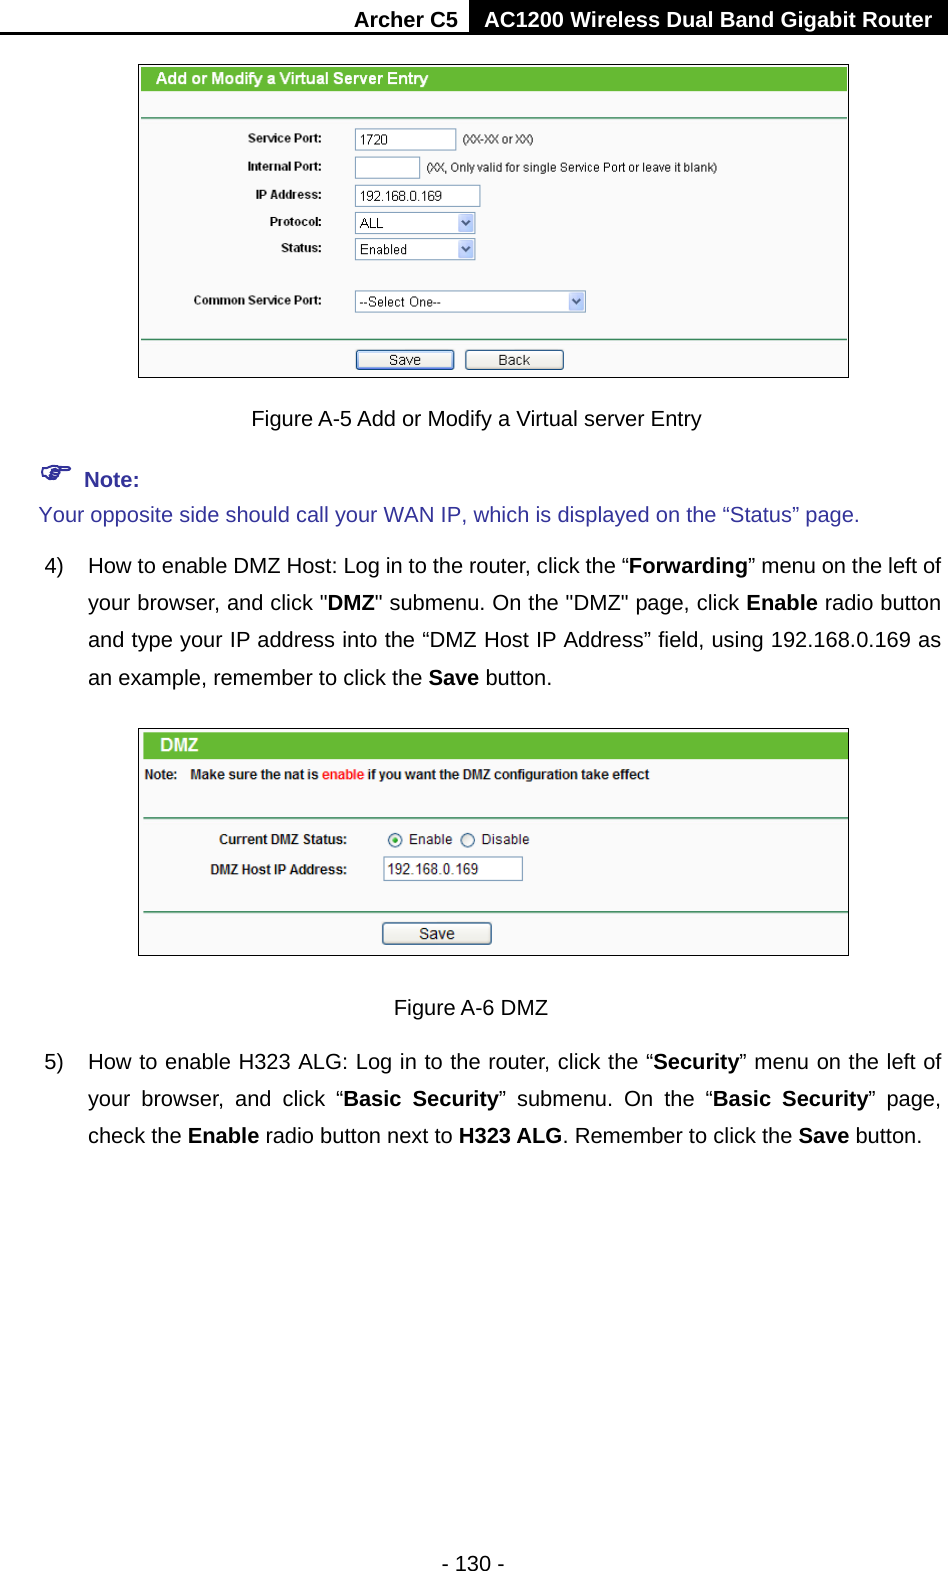 Archer C5 AC1200 Wireless Dual Band Gigabit Router  - 130 -   Figure A-5 Add or Modify a Virtual server Entry  Note: Your opposite side should call your WAN IP, which is displayed on the “Status” page. 4) How to enable DMZ Host: Log in to the router, click the “Forwarding” menu on the left of your browser, and click &quot;DMZ&quot; submenu. On the &quot;DMZ&quot; page, click Enable radio button and type your IP address into the “DMZ Host IP Address” field, using 192.168.0.169 as an example, remember to click the Save button.    Figure A-6 DMZ 5) How to enable H323 ALG: Log in to the router, click the “Security” menu on the left of your browser, and click “Basic Security”  submenu.  On the “Basic Security”  page, check the Enable radio button next to H323 ALG. Remember to click the Save button. 